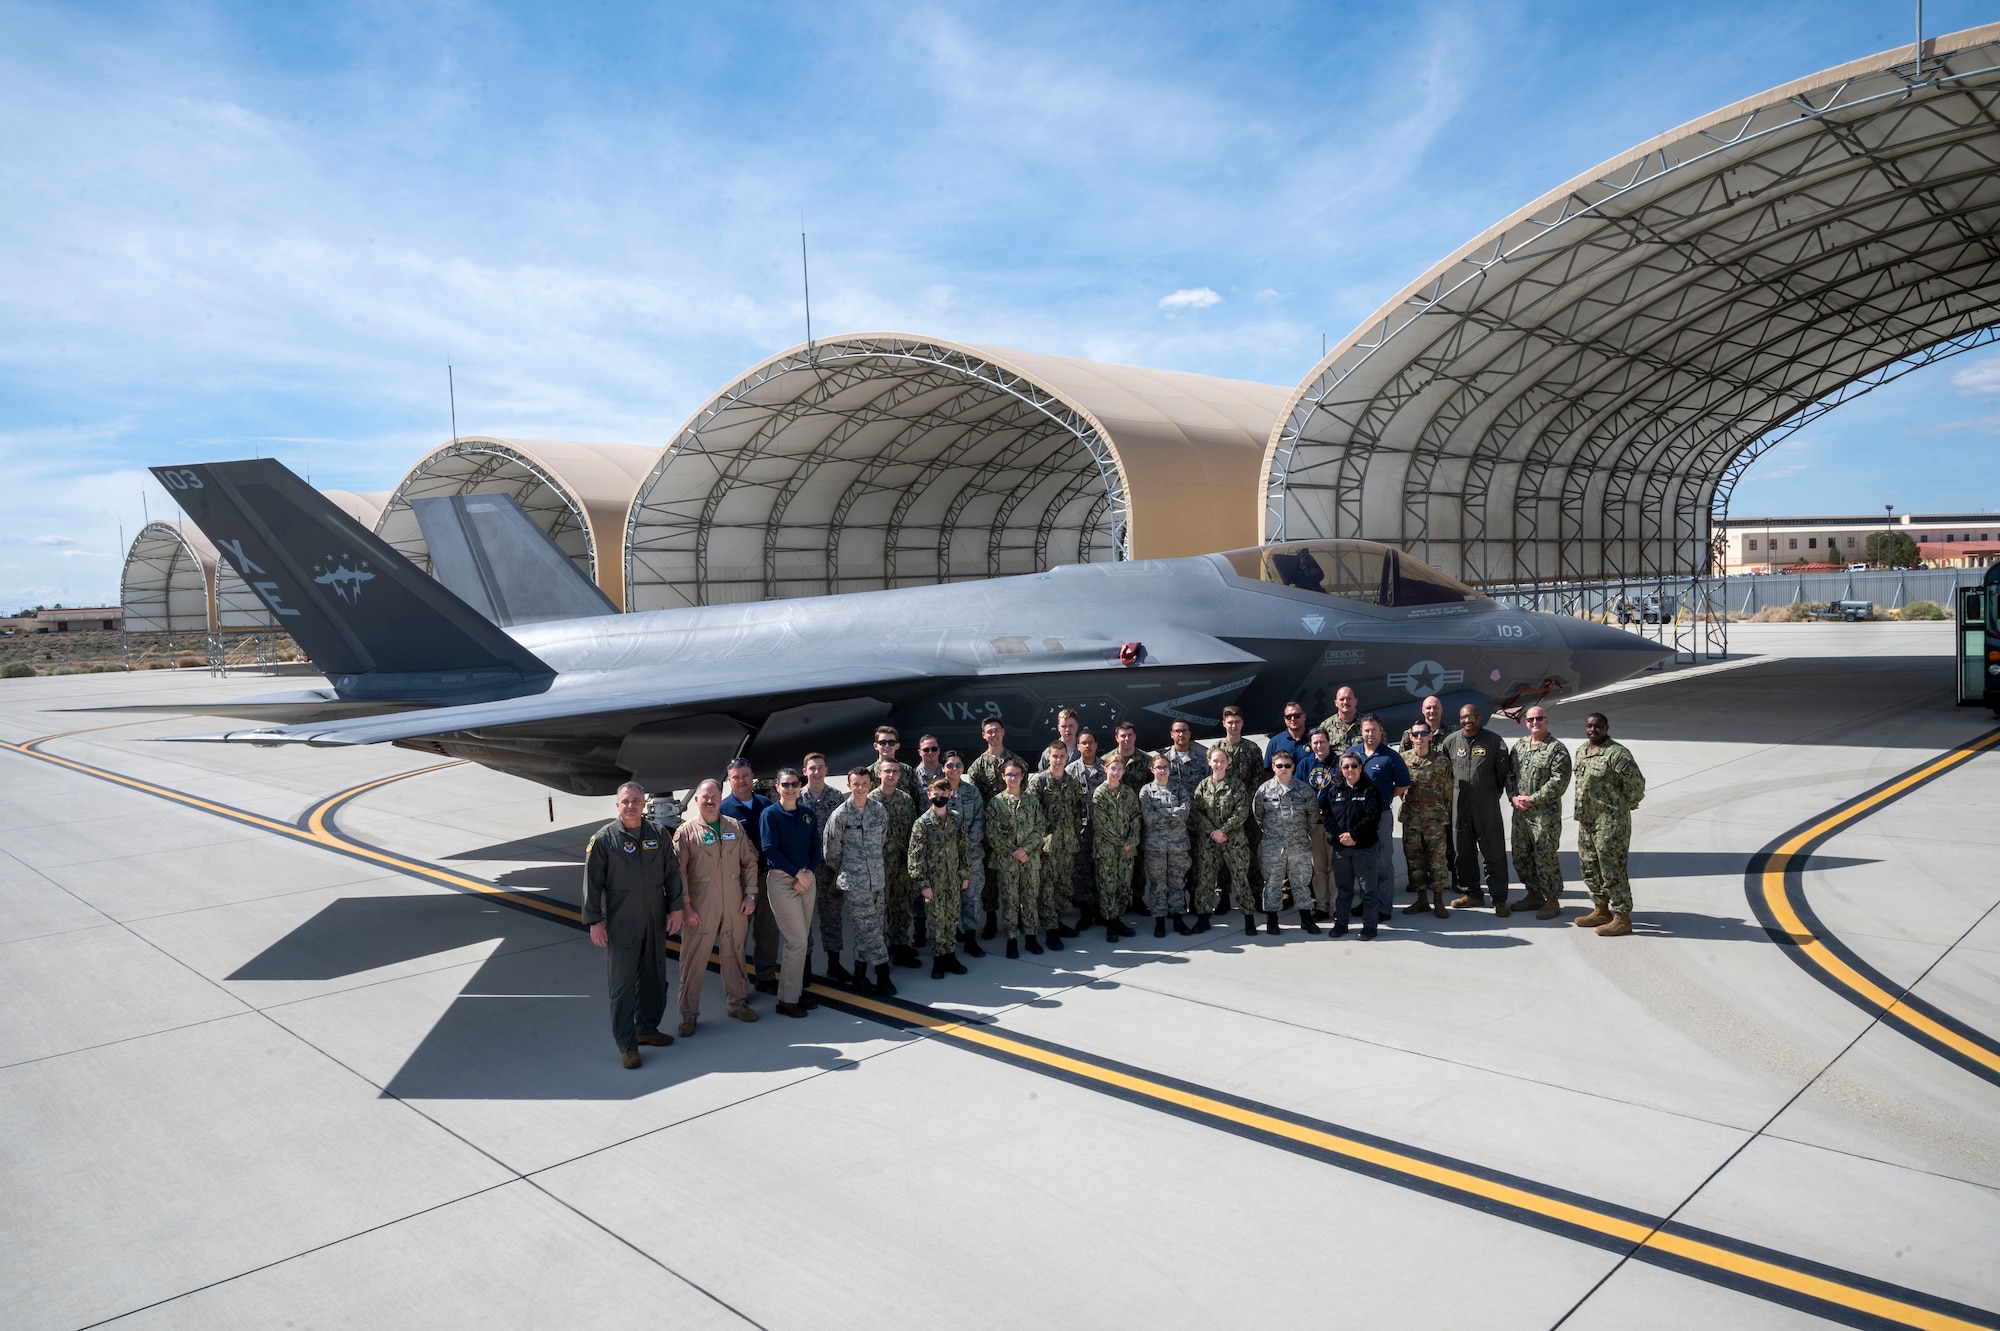 Civil Air Patrol and United States Naval sea cadets pose for a photo in front of a Navy VX-9 F-35C during a tour of Edwards Air Force Base hosted by the Air Force Operational Test and Evaluation Center Detachment 5, March 17.